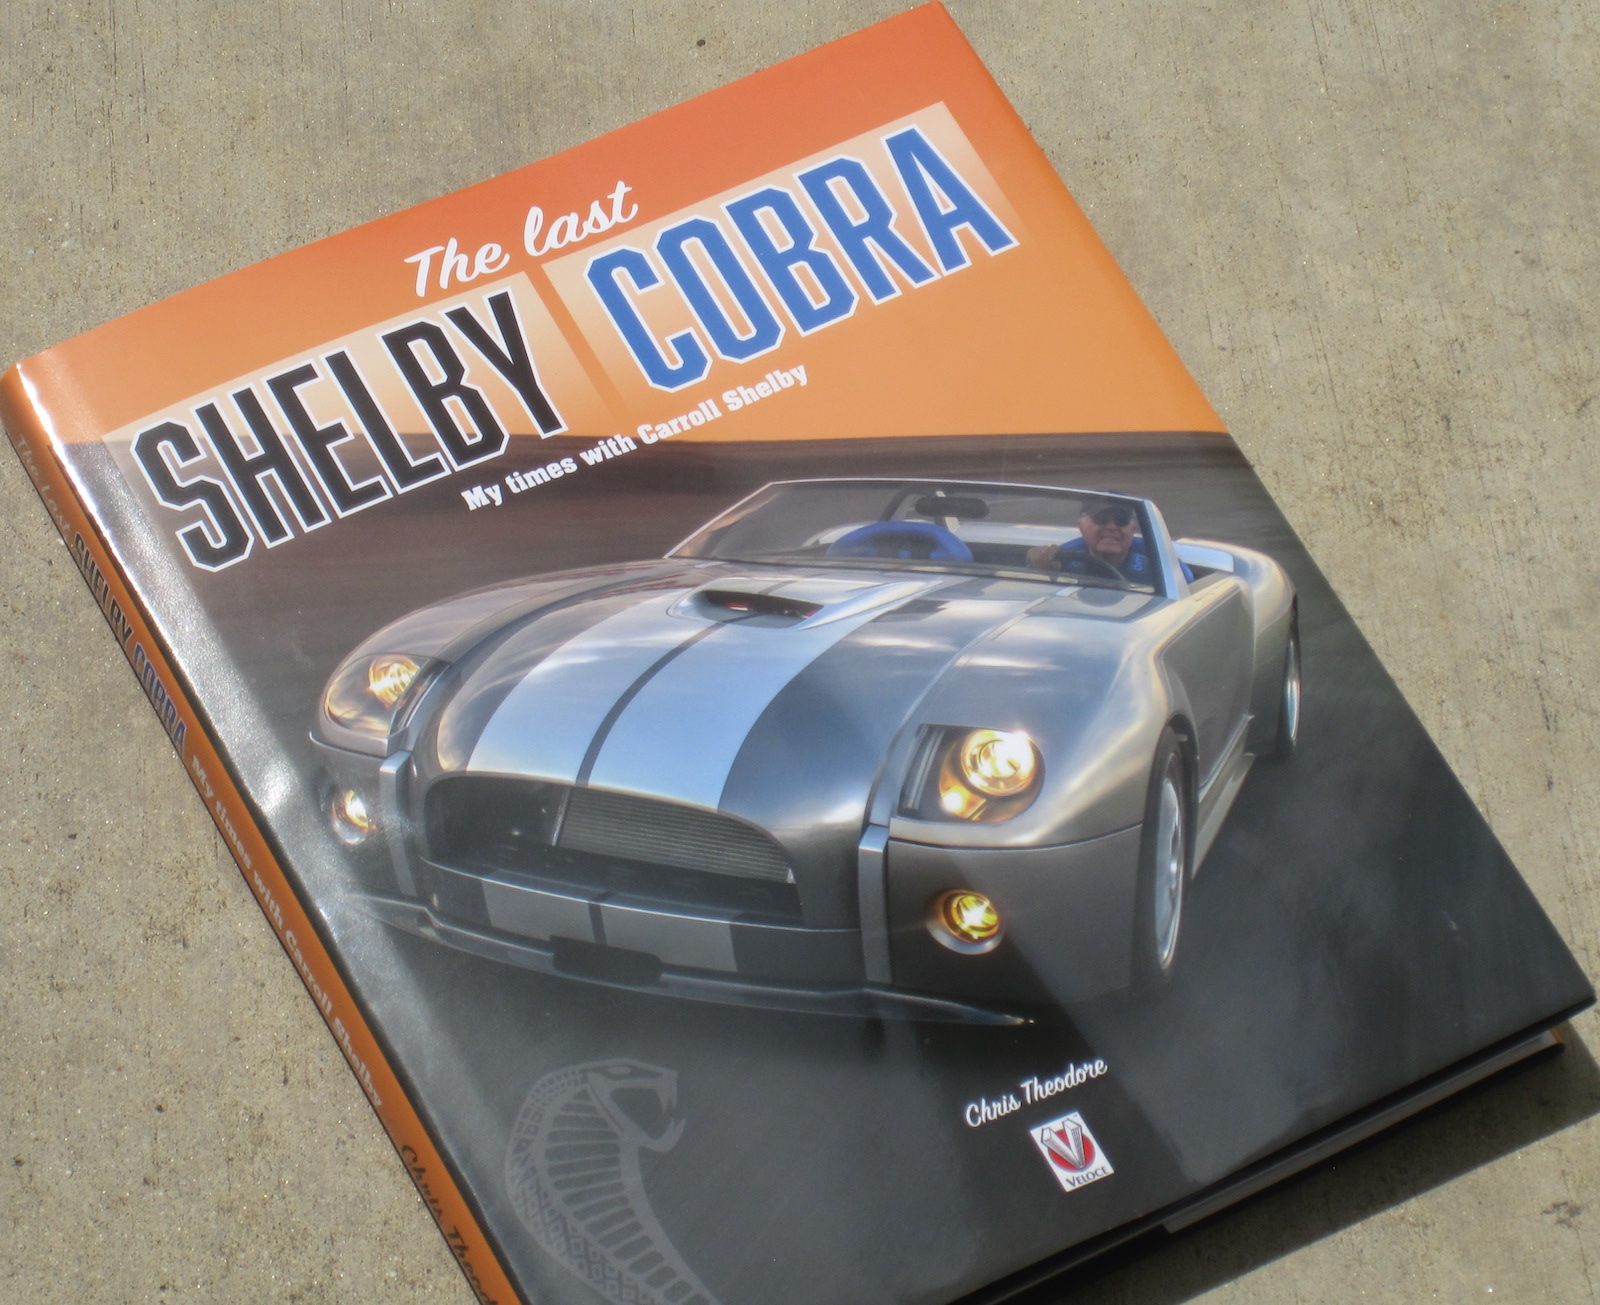 BOOK REVIEW: The Last Shelby Cobra: My Times with Carroll Shelby